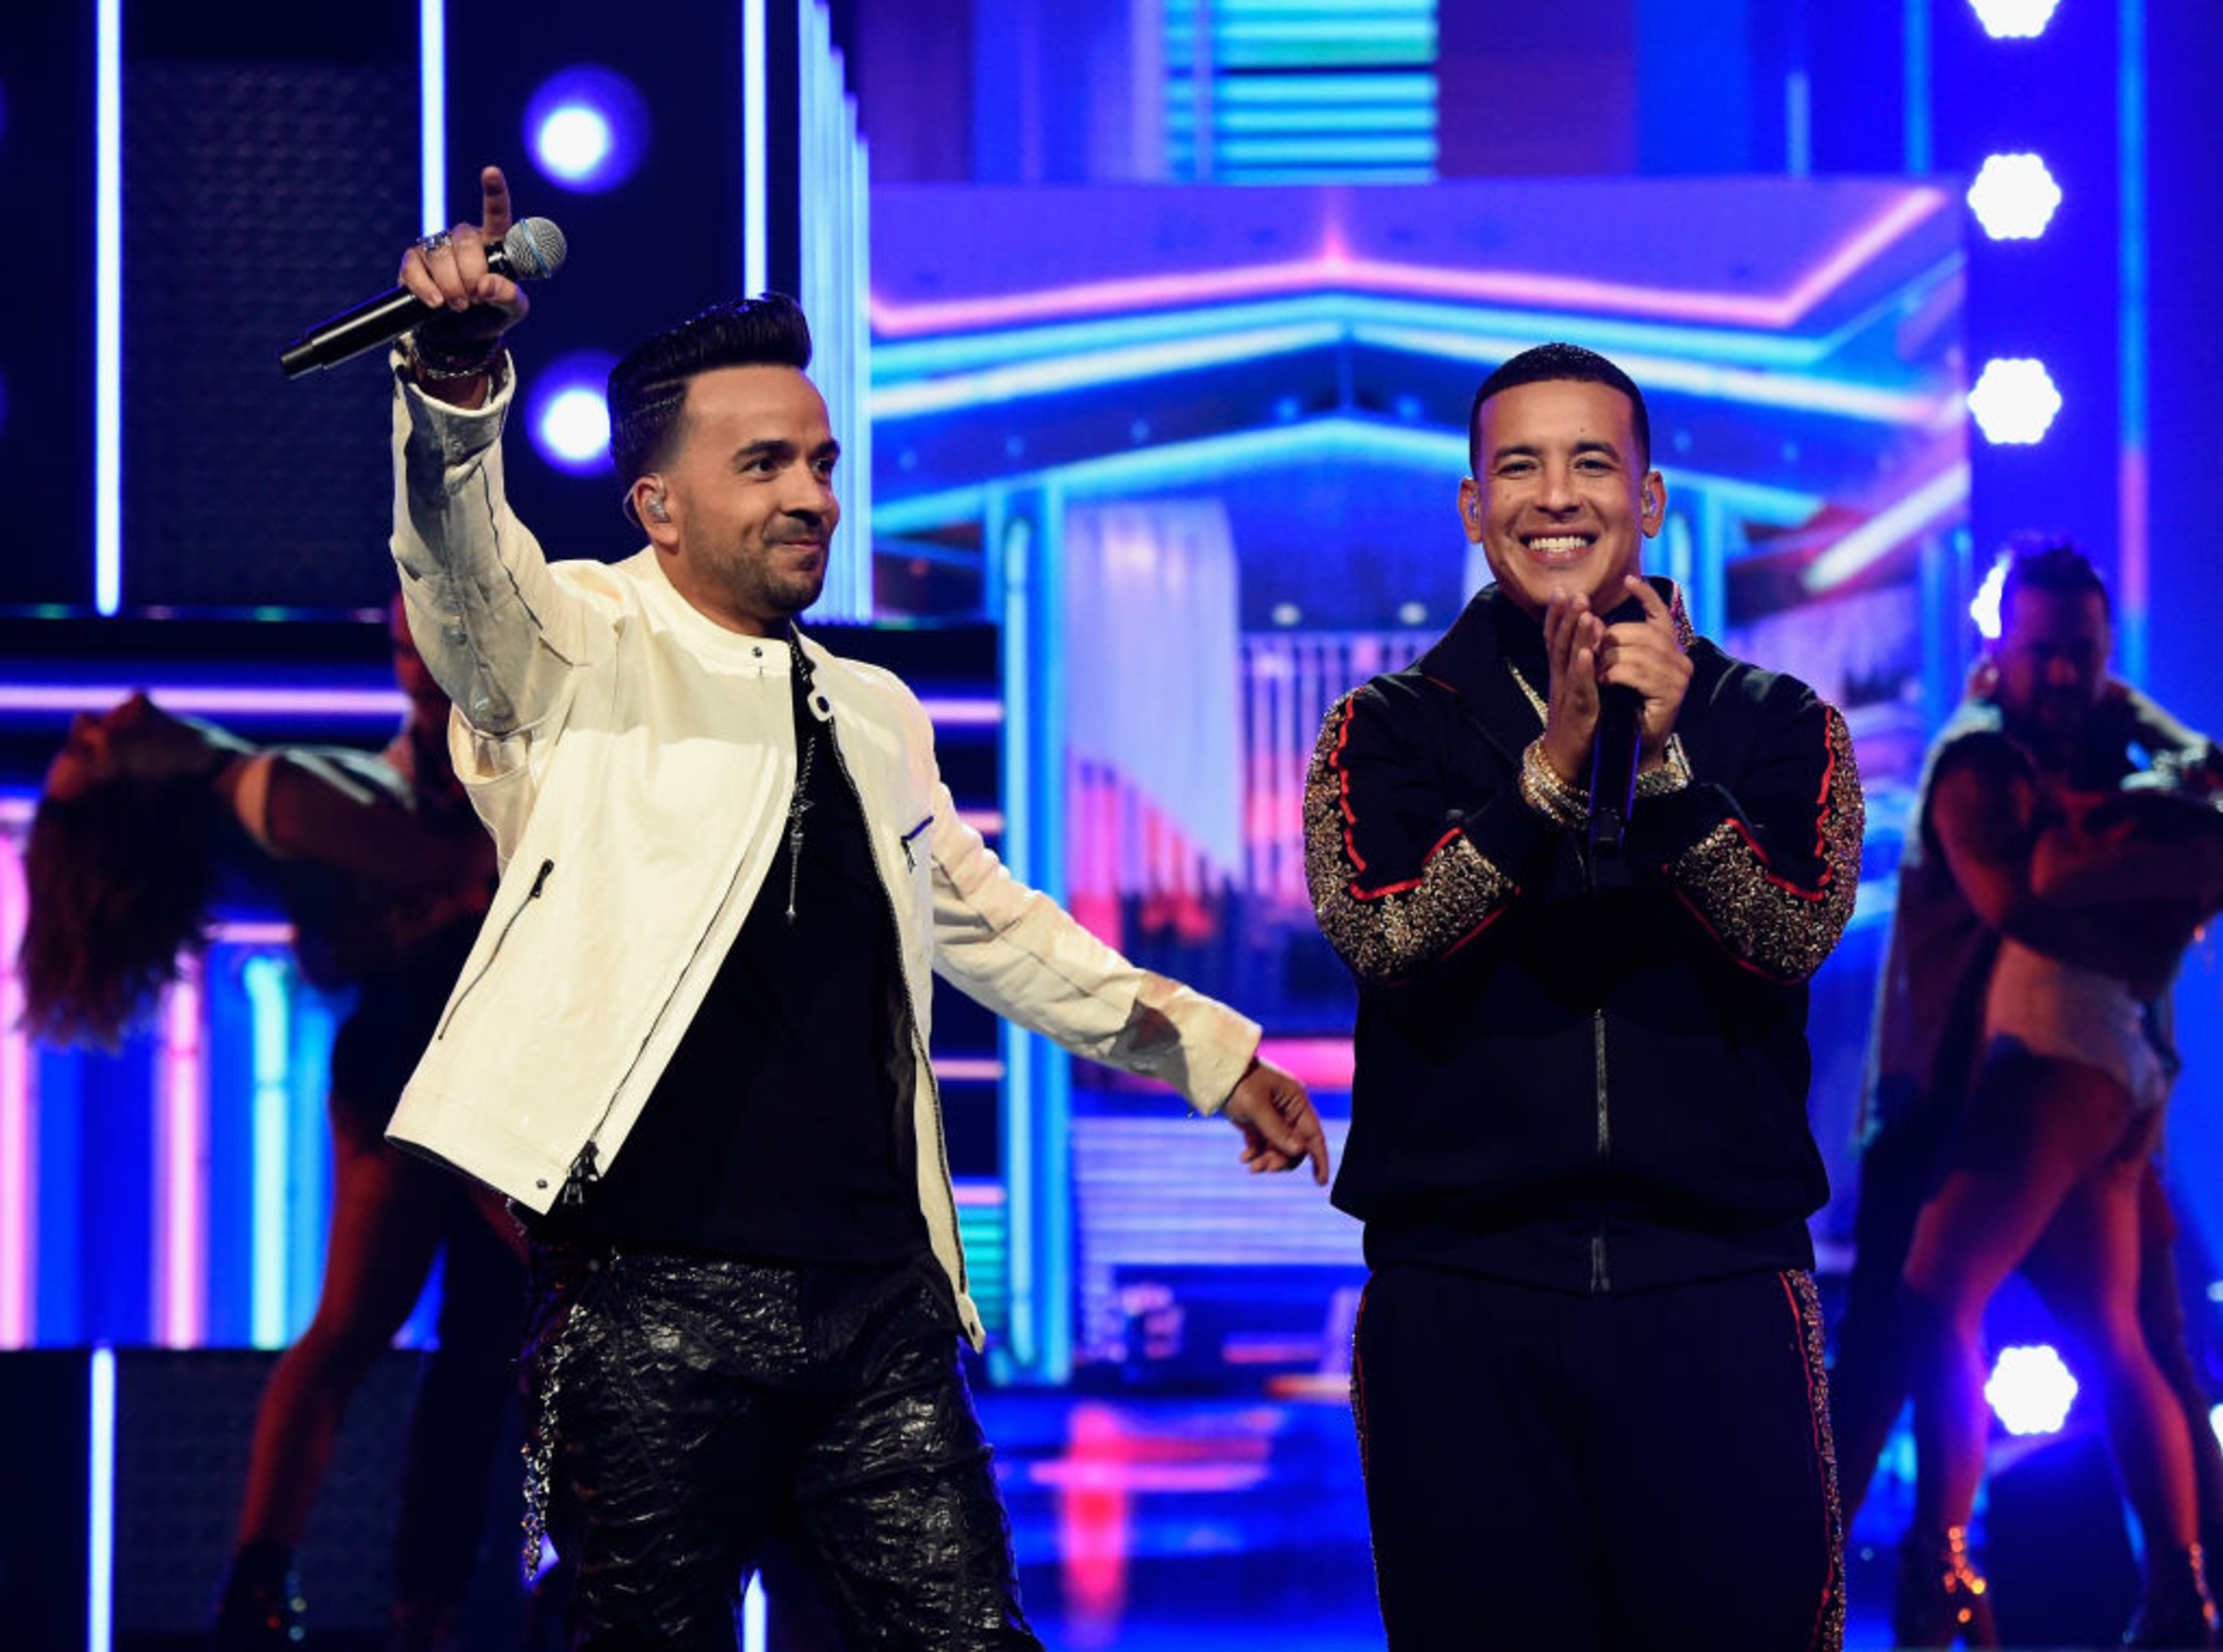 <p>In 2017, there was no escaping the Luis Fonsi and Daddy Yankee hit <a href="https://www.youtube.com/watch?v=kJQP7kiw5Fk" rel="noopener noreferrer">“Despacito.”</a> When they added Justin Bieber to the remix, it took the song to even more massive success. “Despacito” is all about having a sexual relationship with someone, in a slow and sensual way.</p><p>You may also like: <a href='https://www.yardbarker.com/entertainment/articles/20_songs_guaranteed_to_make_you_cry_040924/s1__39673457'>20 songs guaranteed to make you cry</a></p>